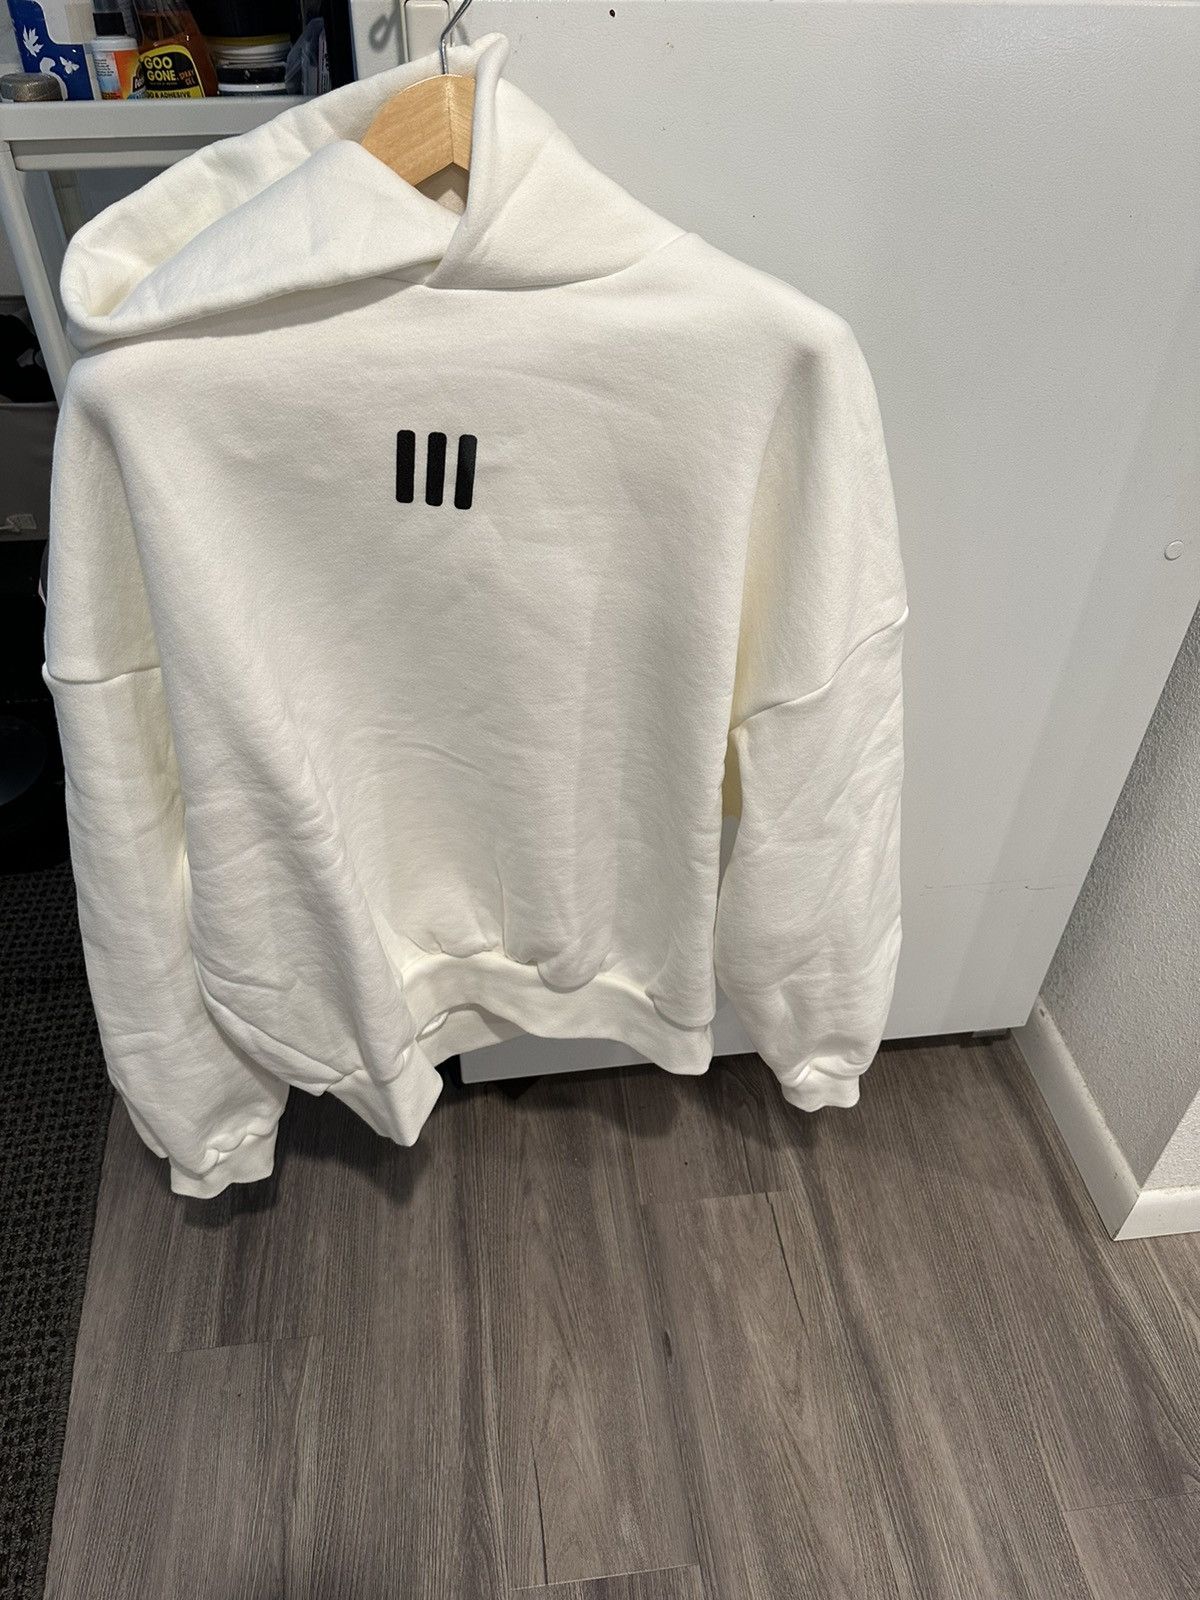 FEAR OF GOD x Hollywood Bowl merch Hoodie Size 3 very limited